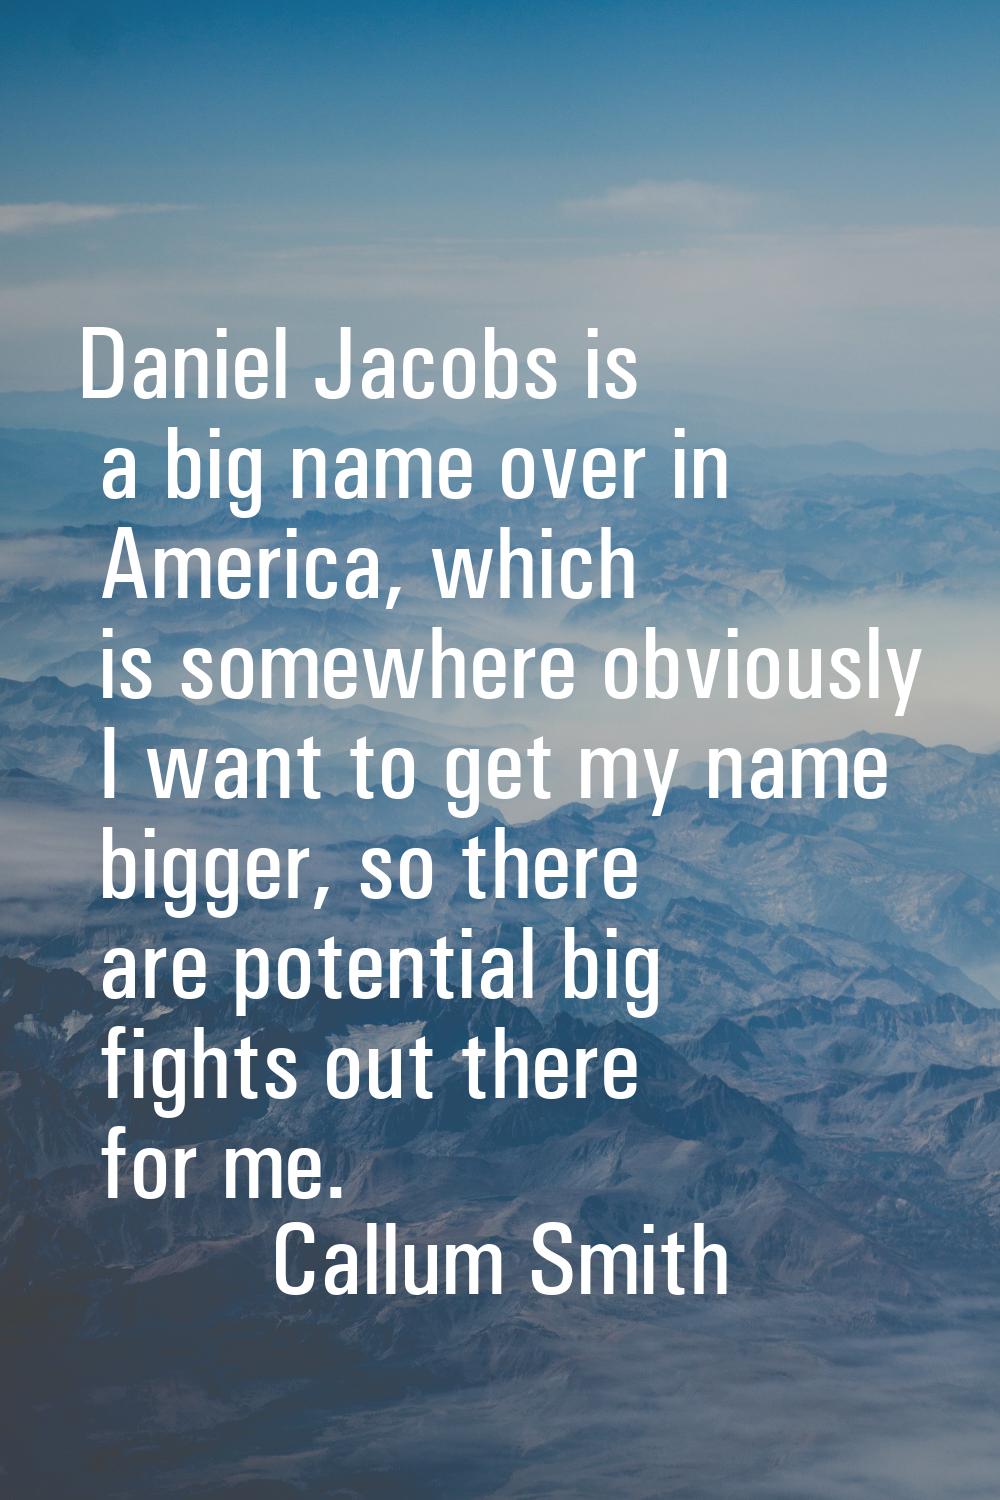 Daniel Jacobs is a big name over in America, which is somewhere obviously I want to get my name big